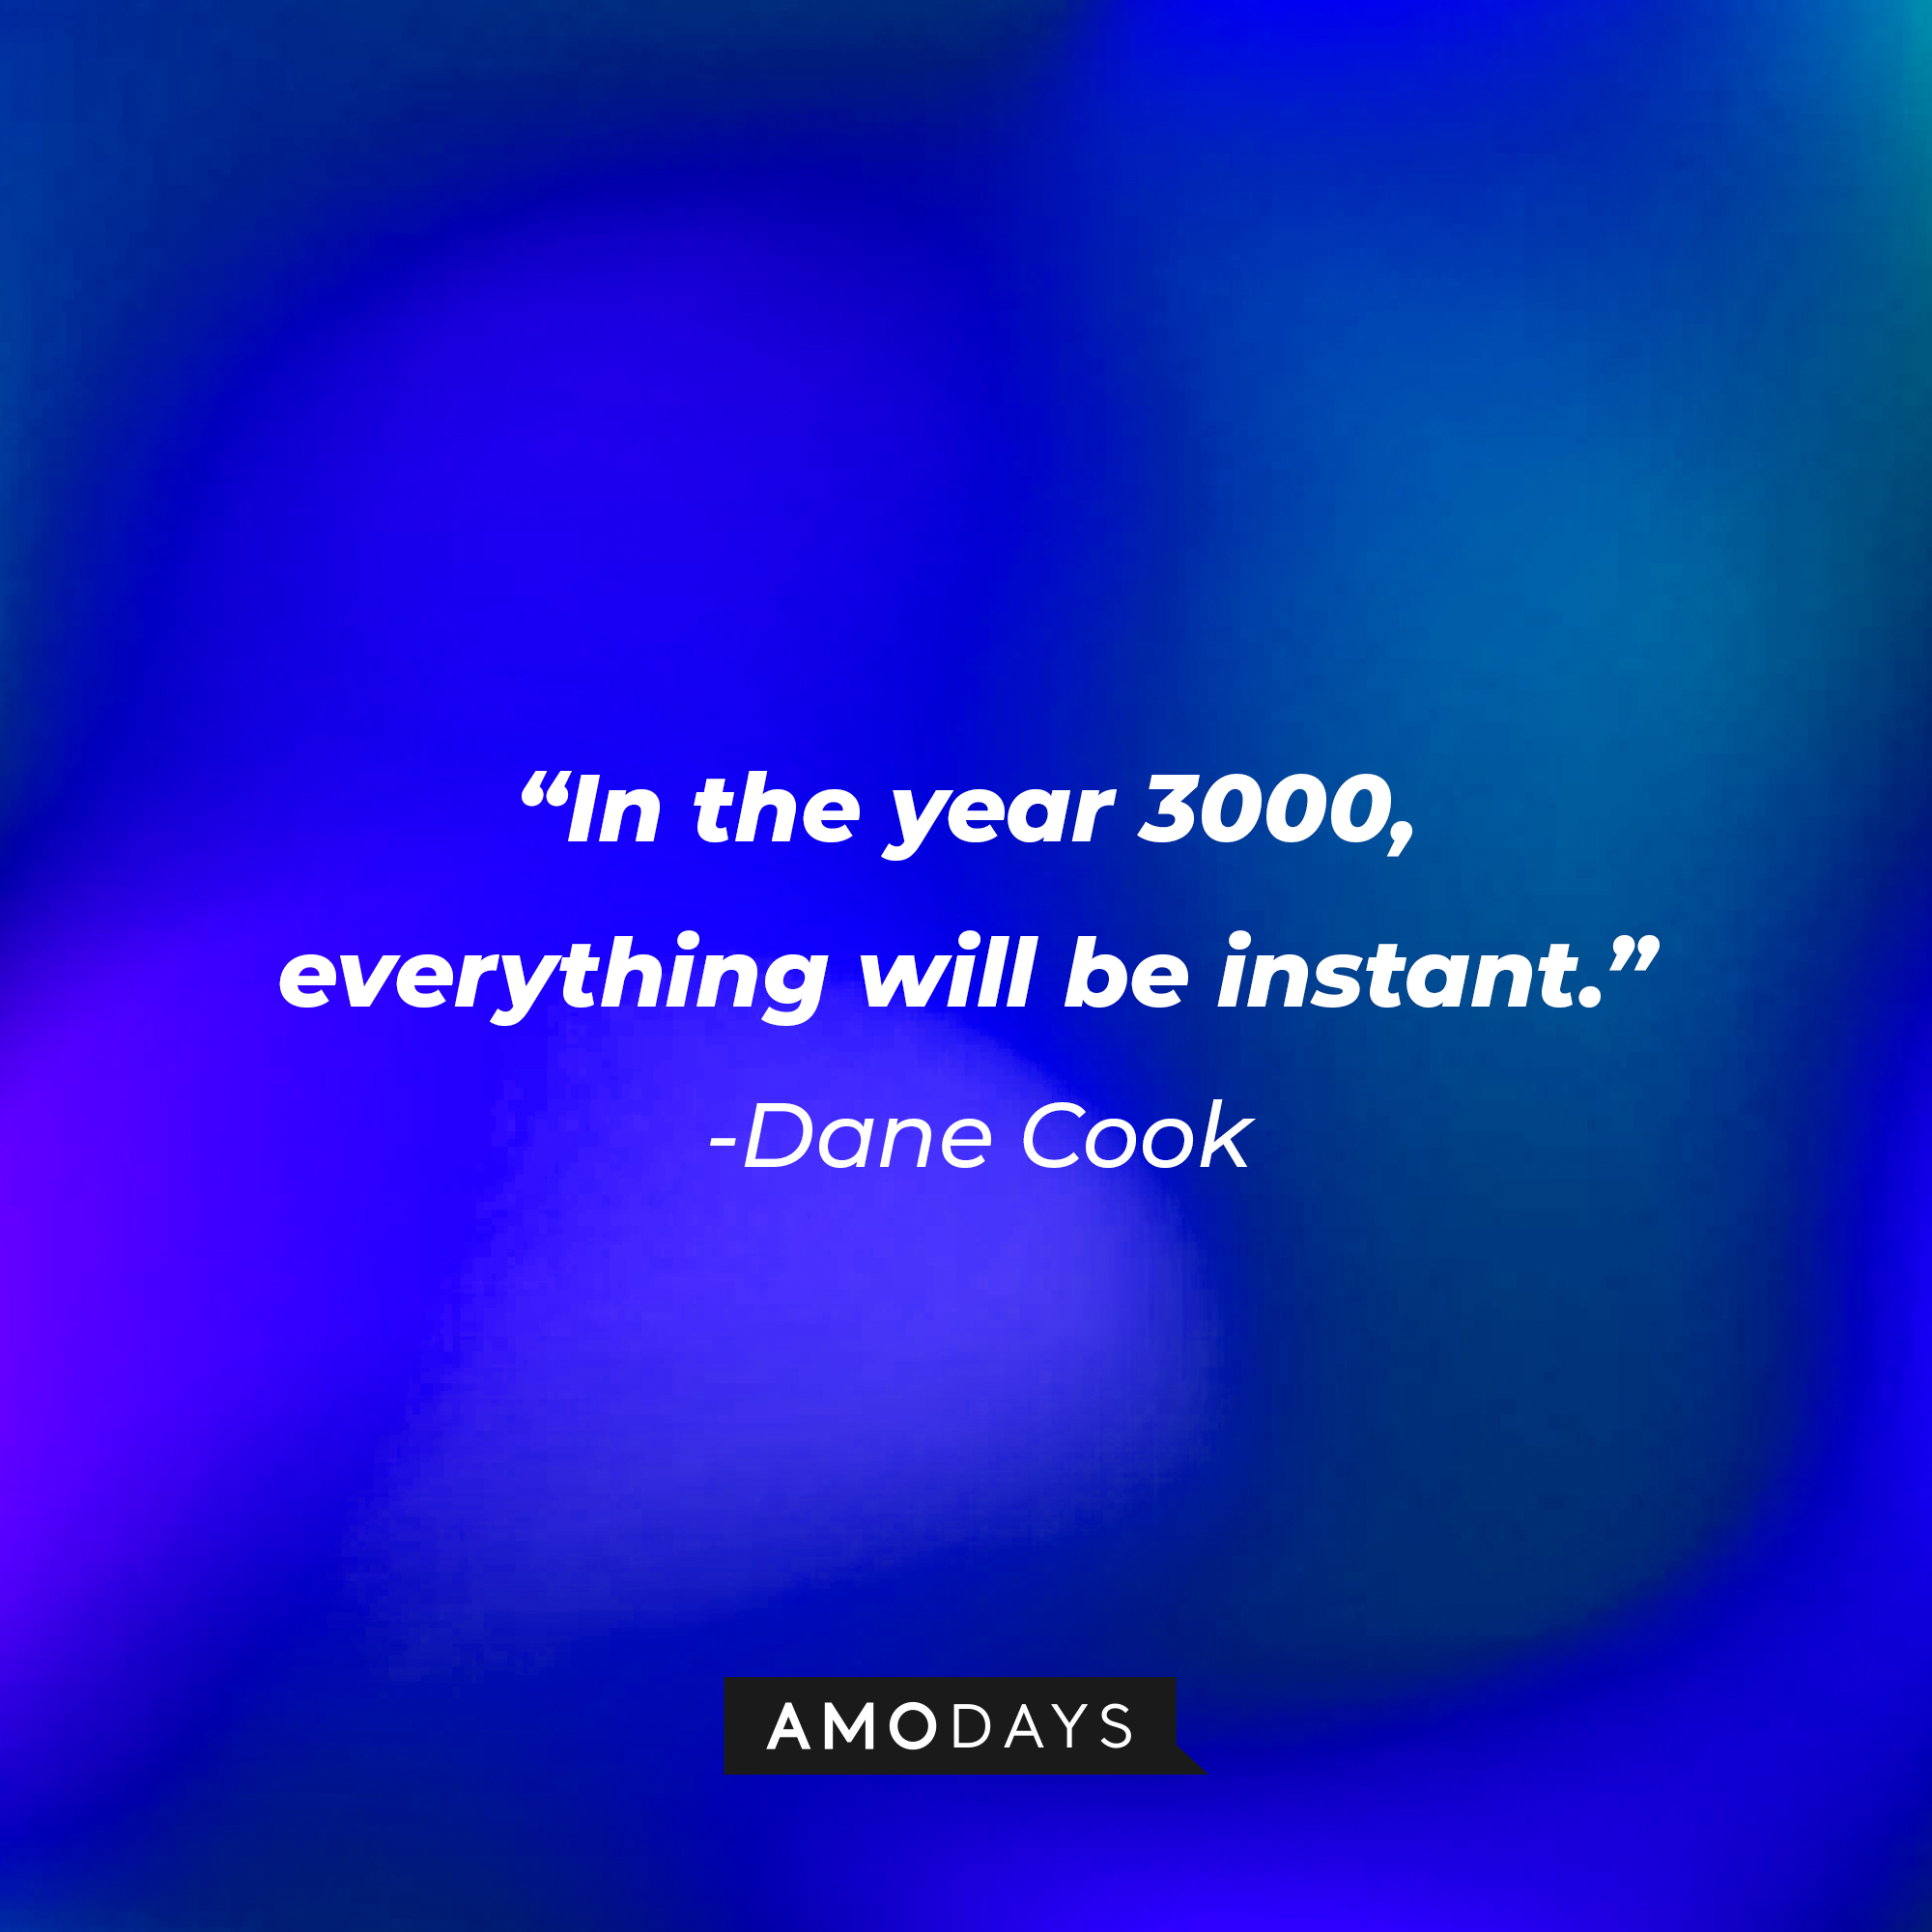 Dane Cook's quote: “In the year 3000, everything will be instant.” | Source: Amodays